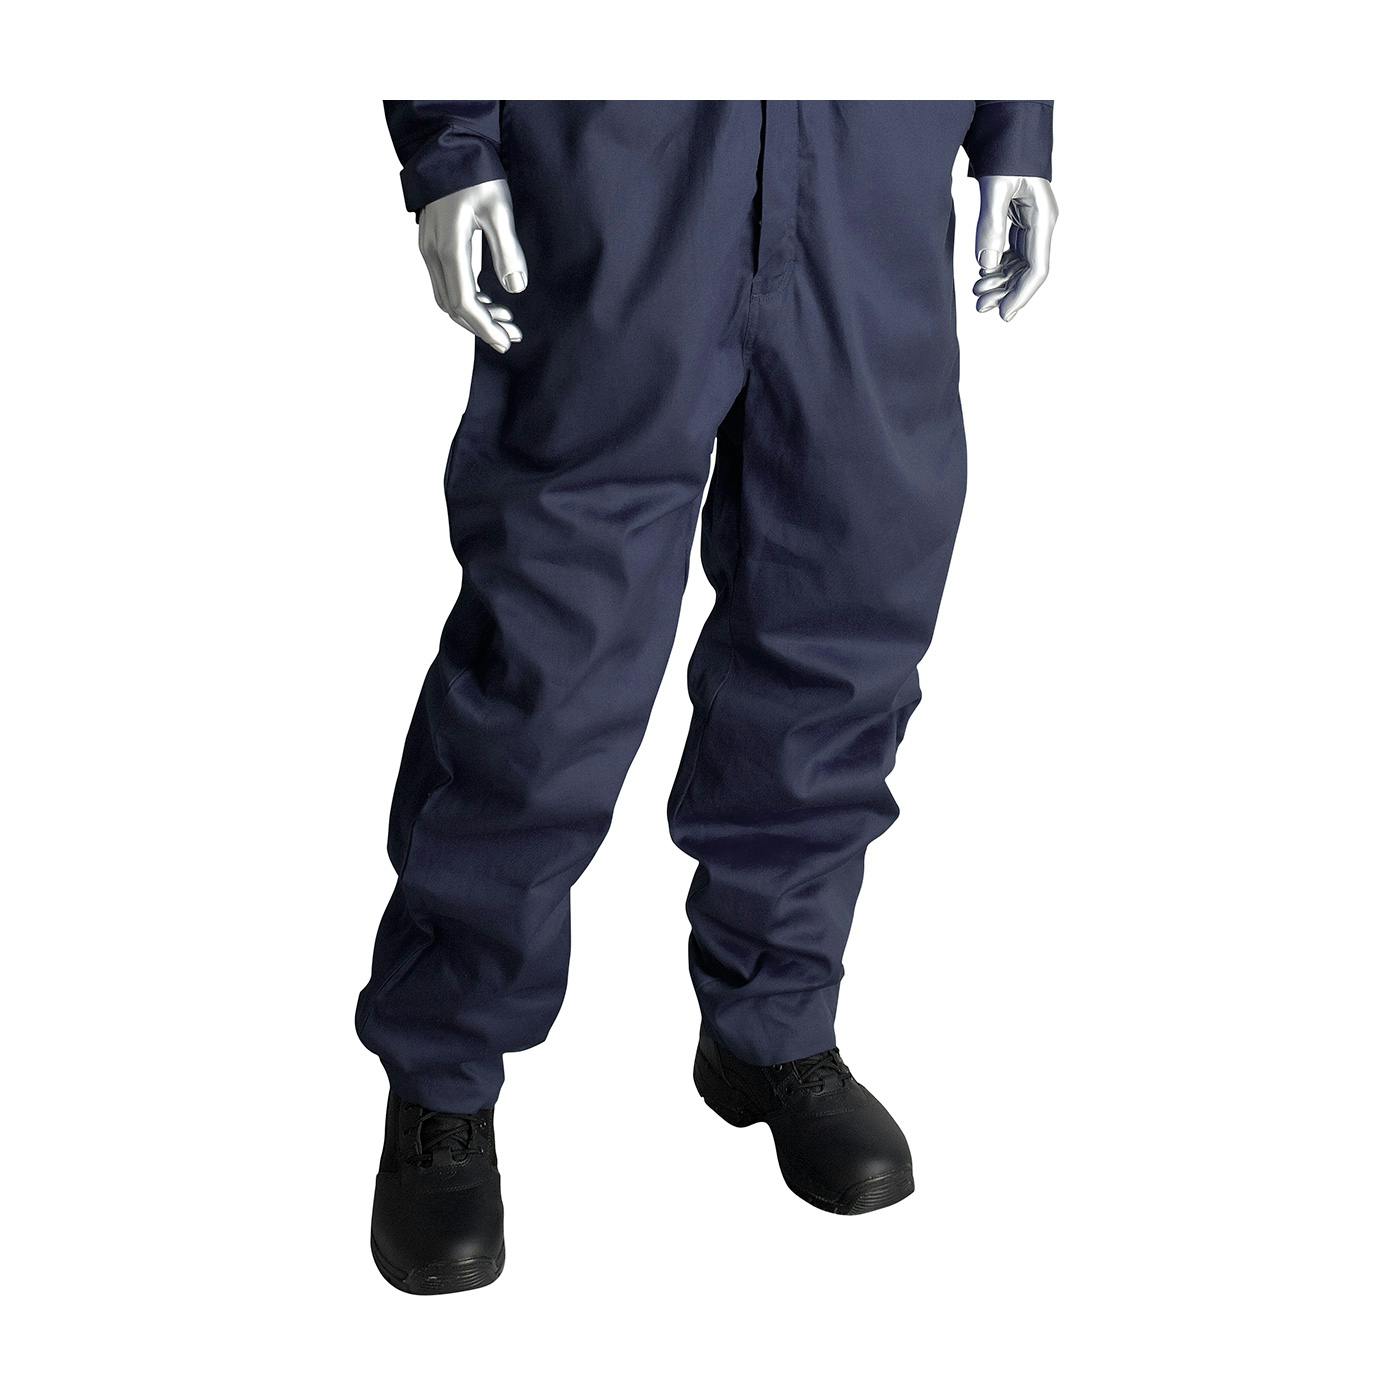 AR/FR Dual Certified Coverall with Zipper Closure - 9.2 Cal/cm2, Navy (385-FRSC) - 4XL